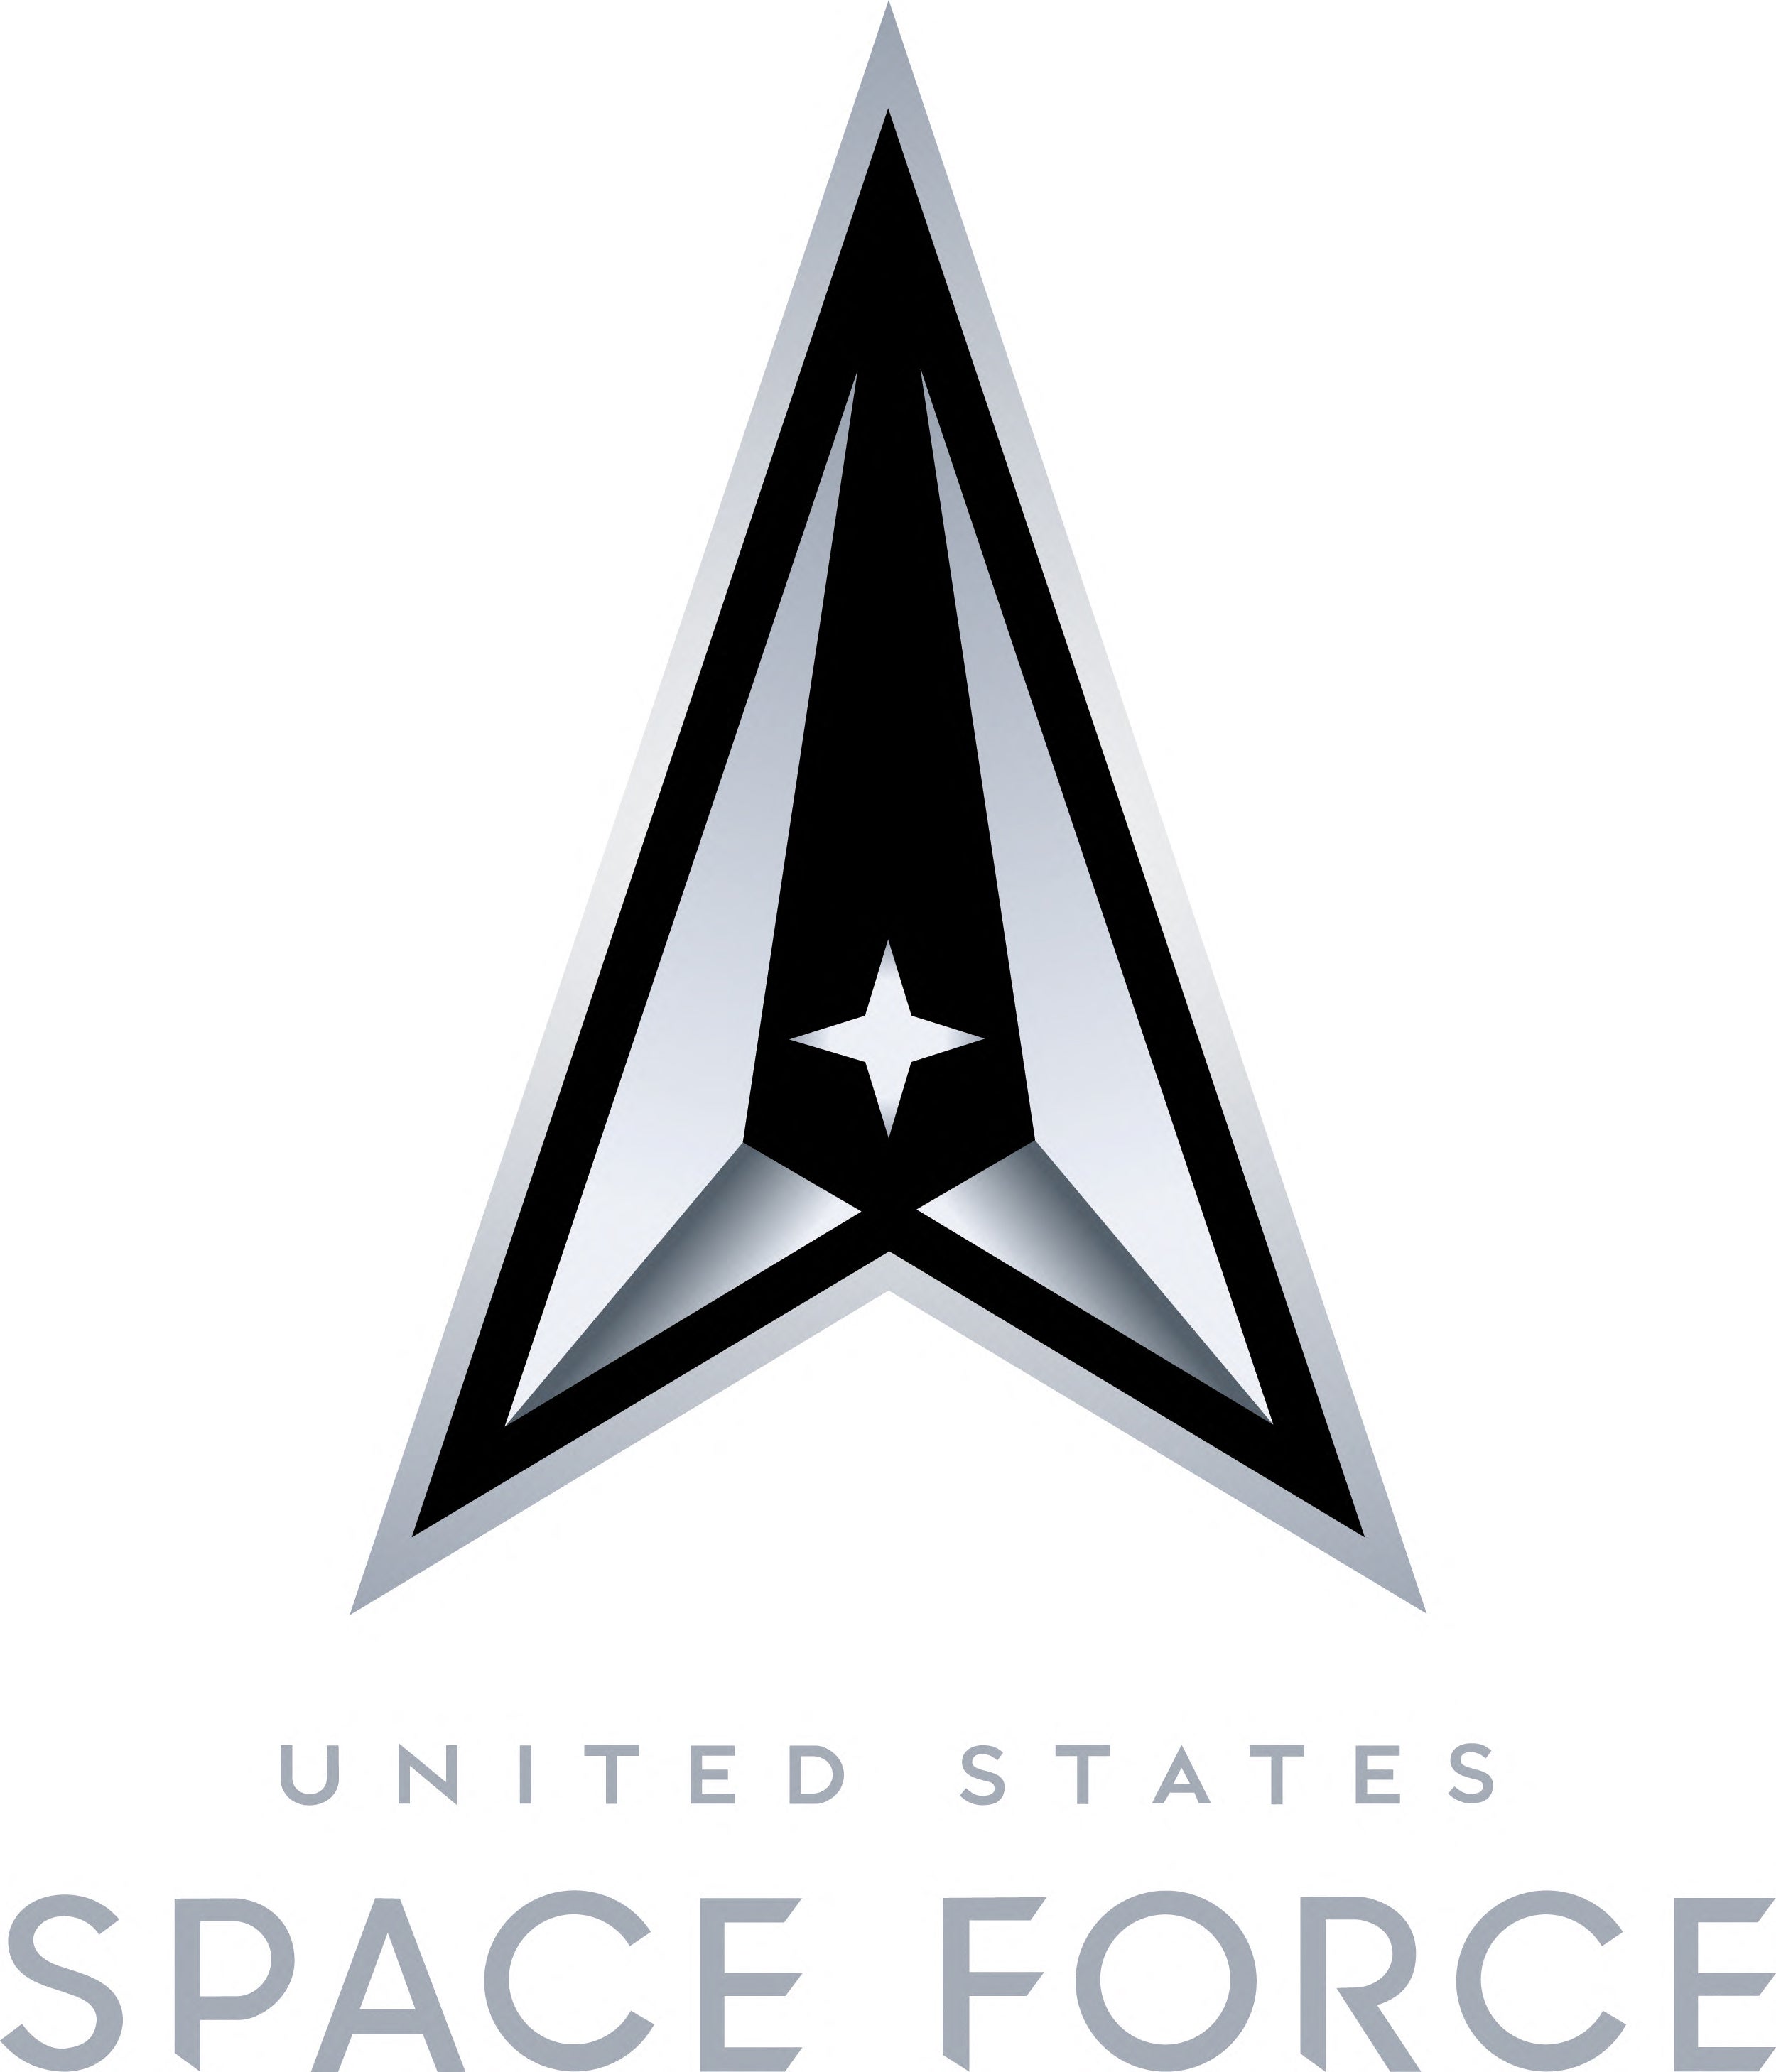 Space force logo